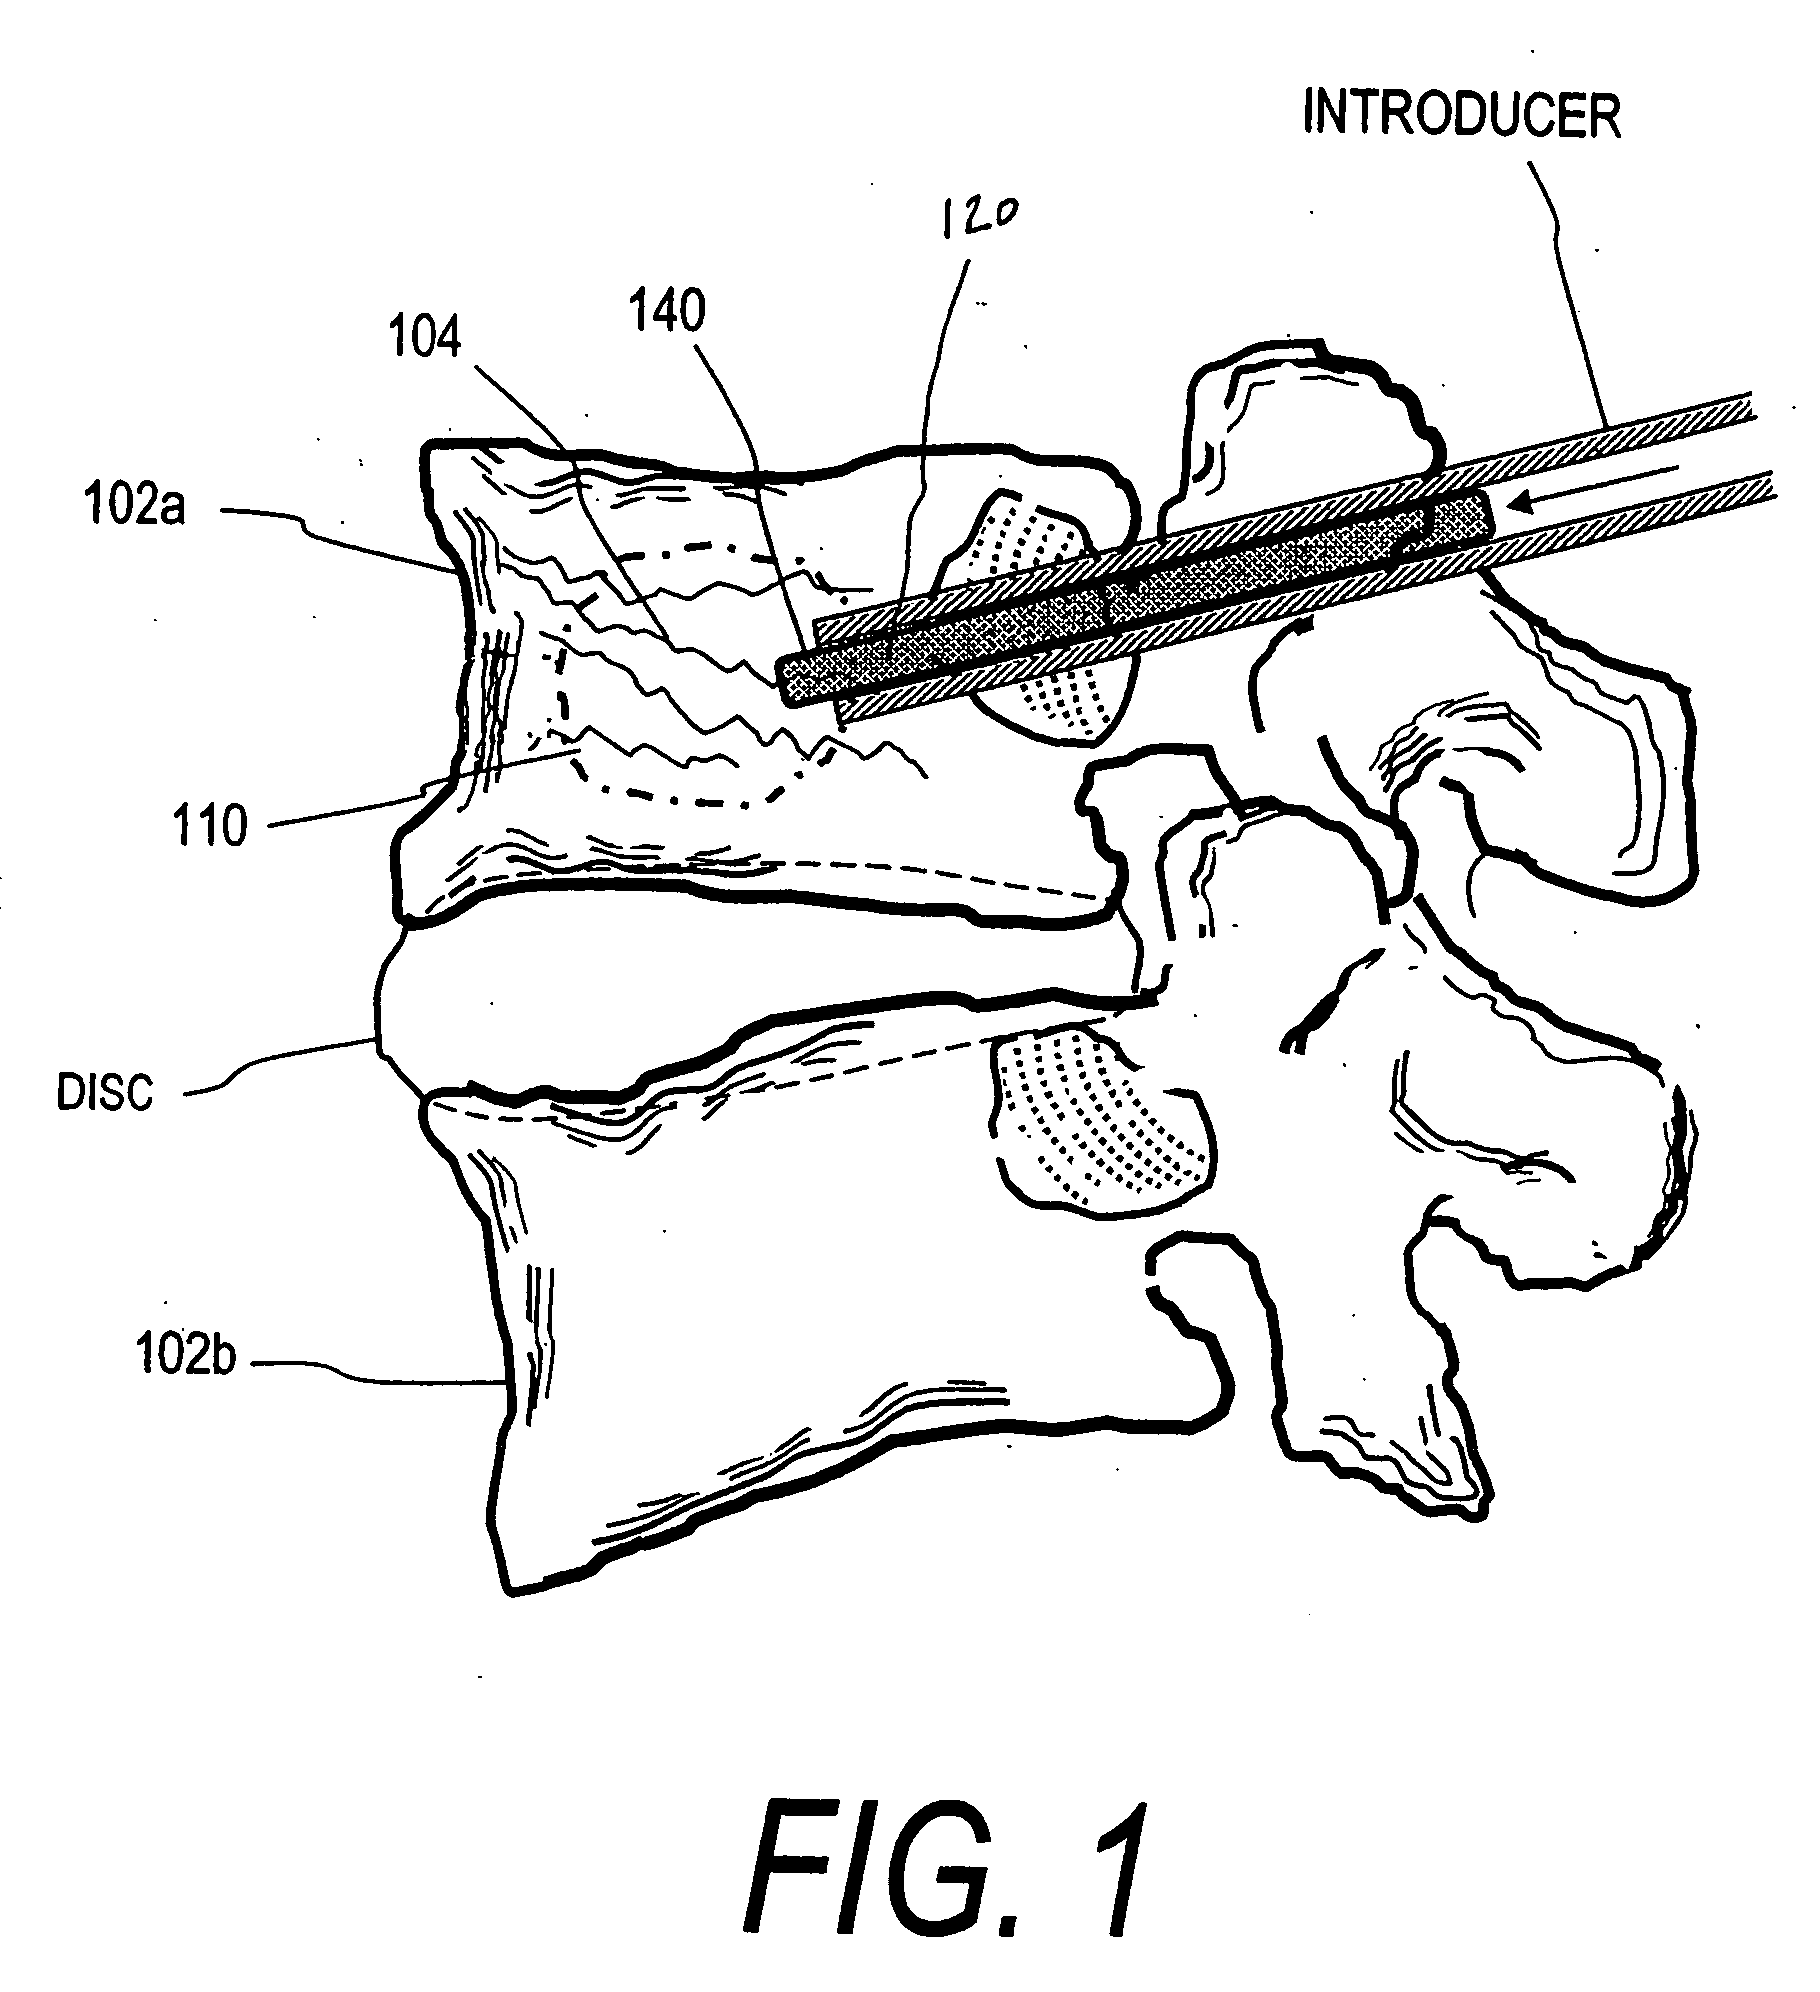 Implants and methods for treating bone